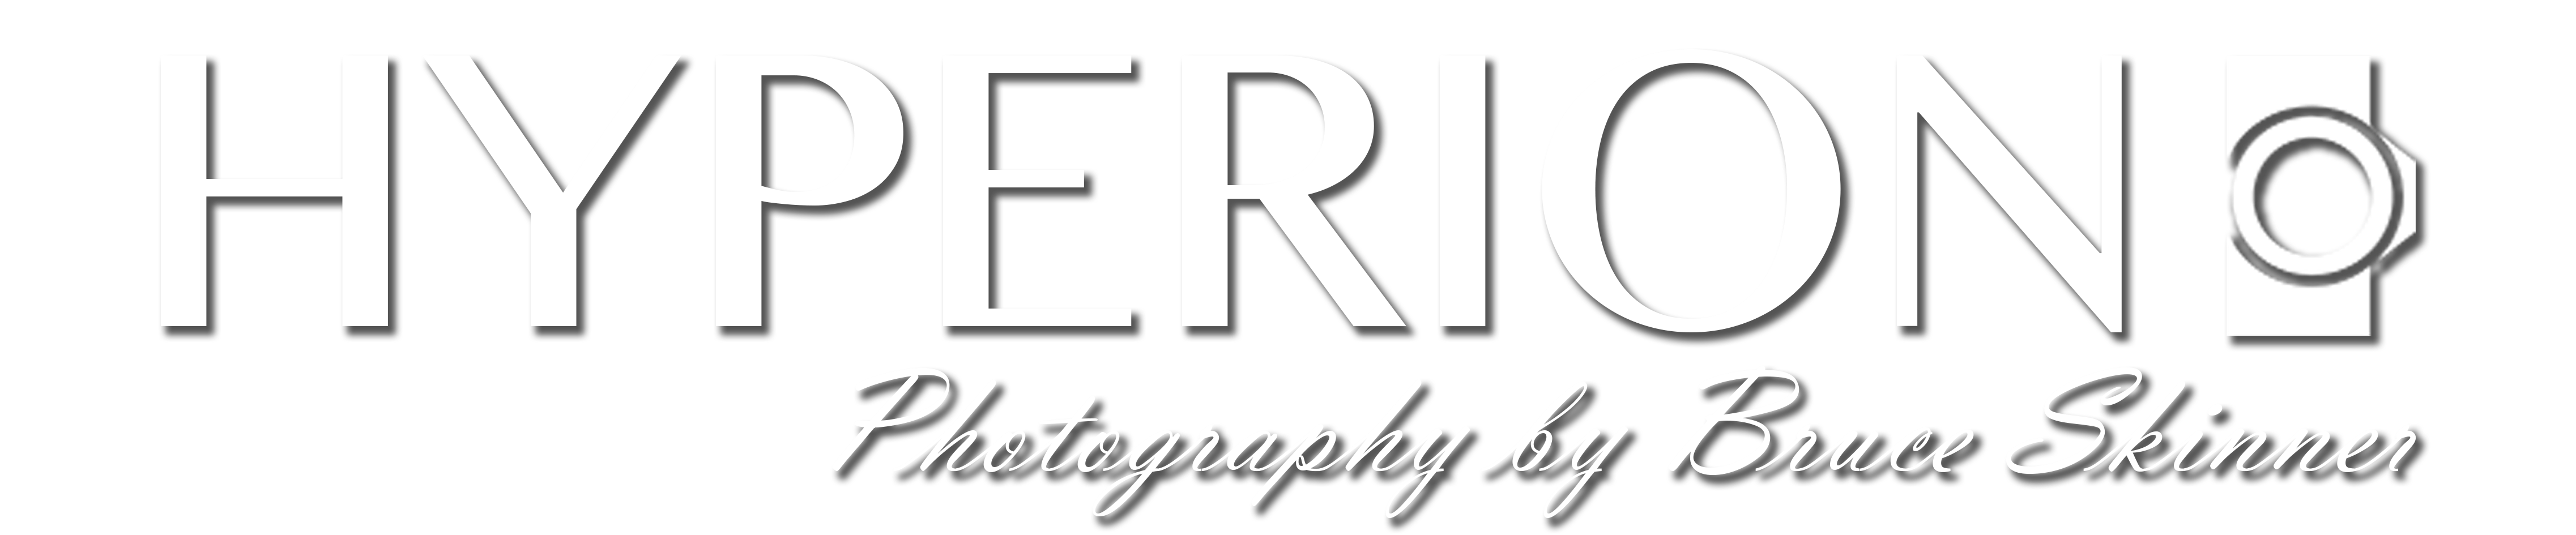 Hyperion Photography